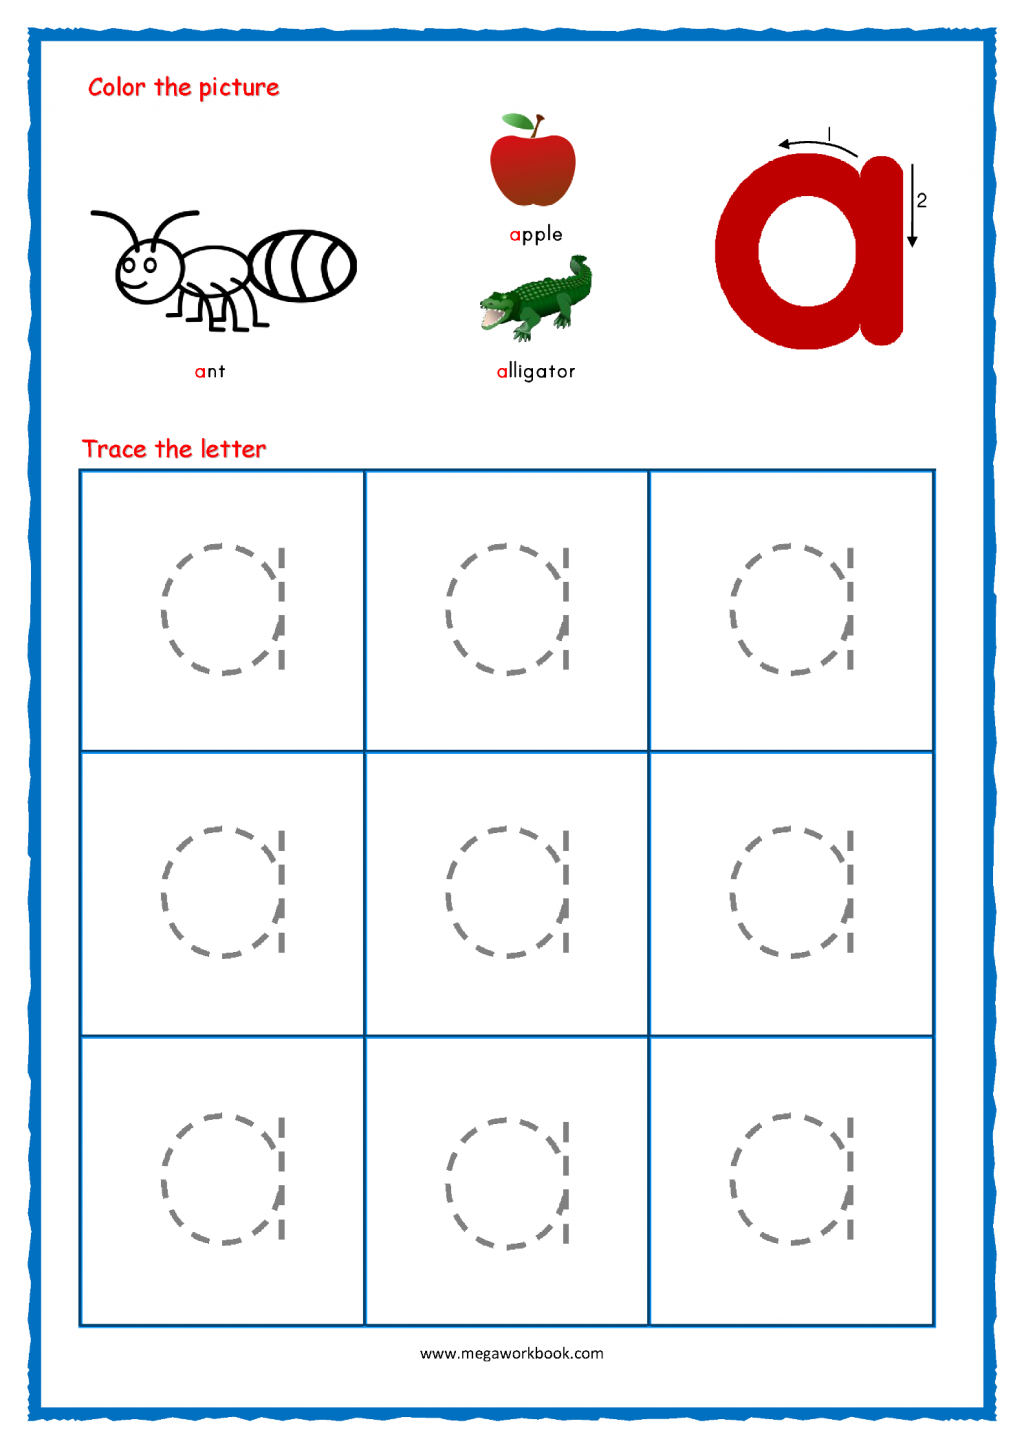 Worksheet ~ Worksheet Ideas Tracing For Toddlers Small pertaining to Alphabet Tracing Toddler